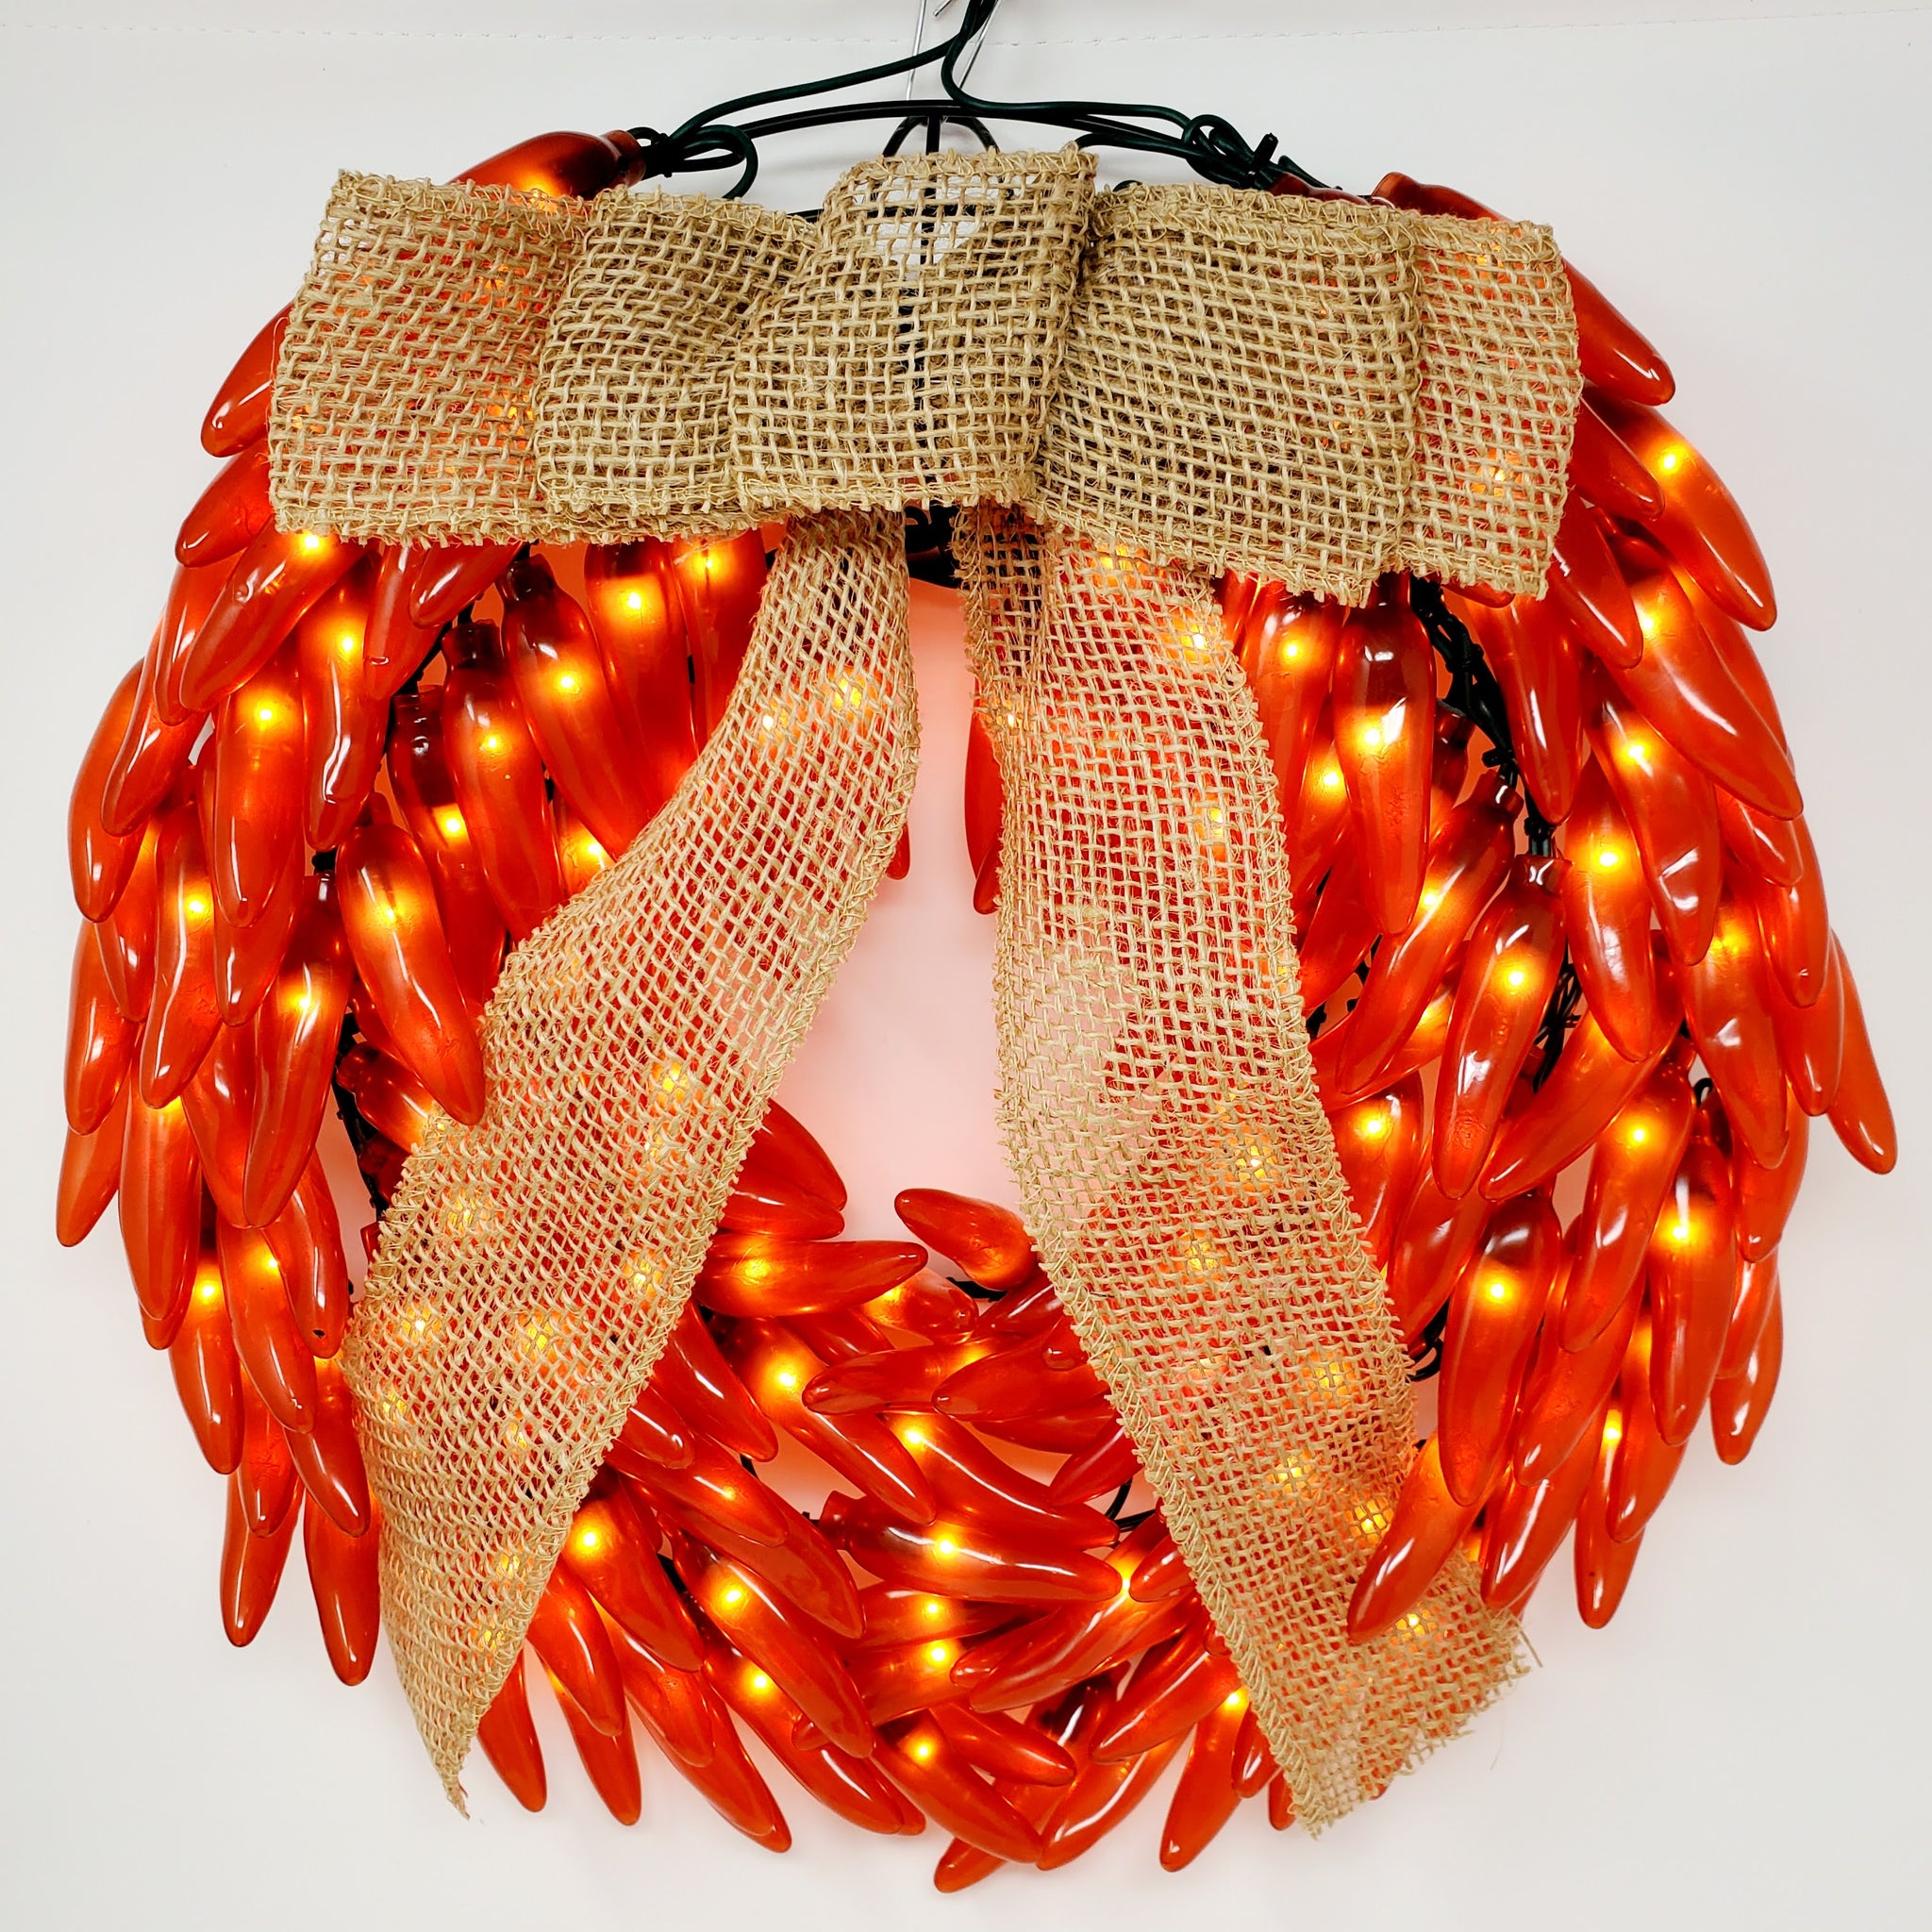 Chile Pepper Lighted Wreath -150 lights - Red